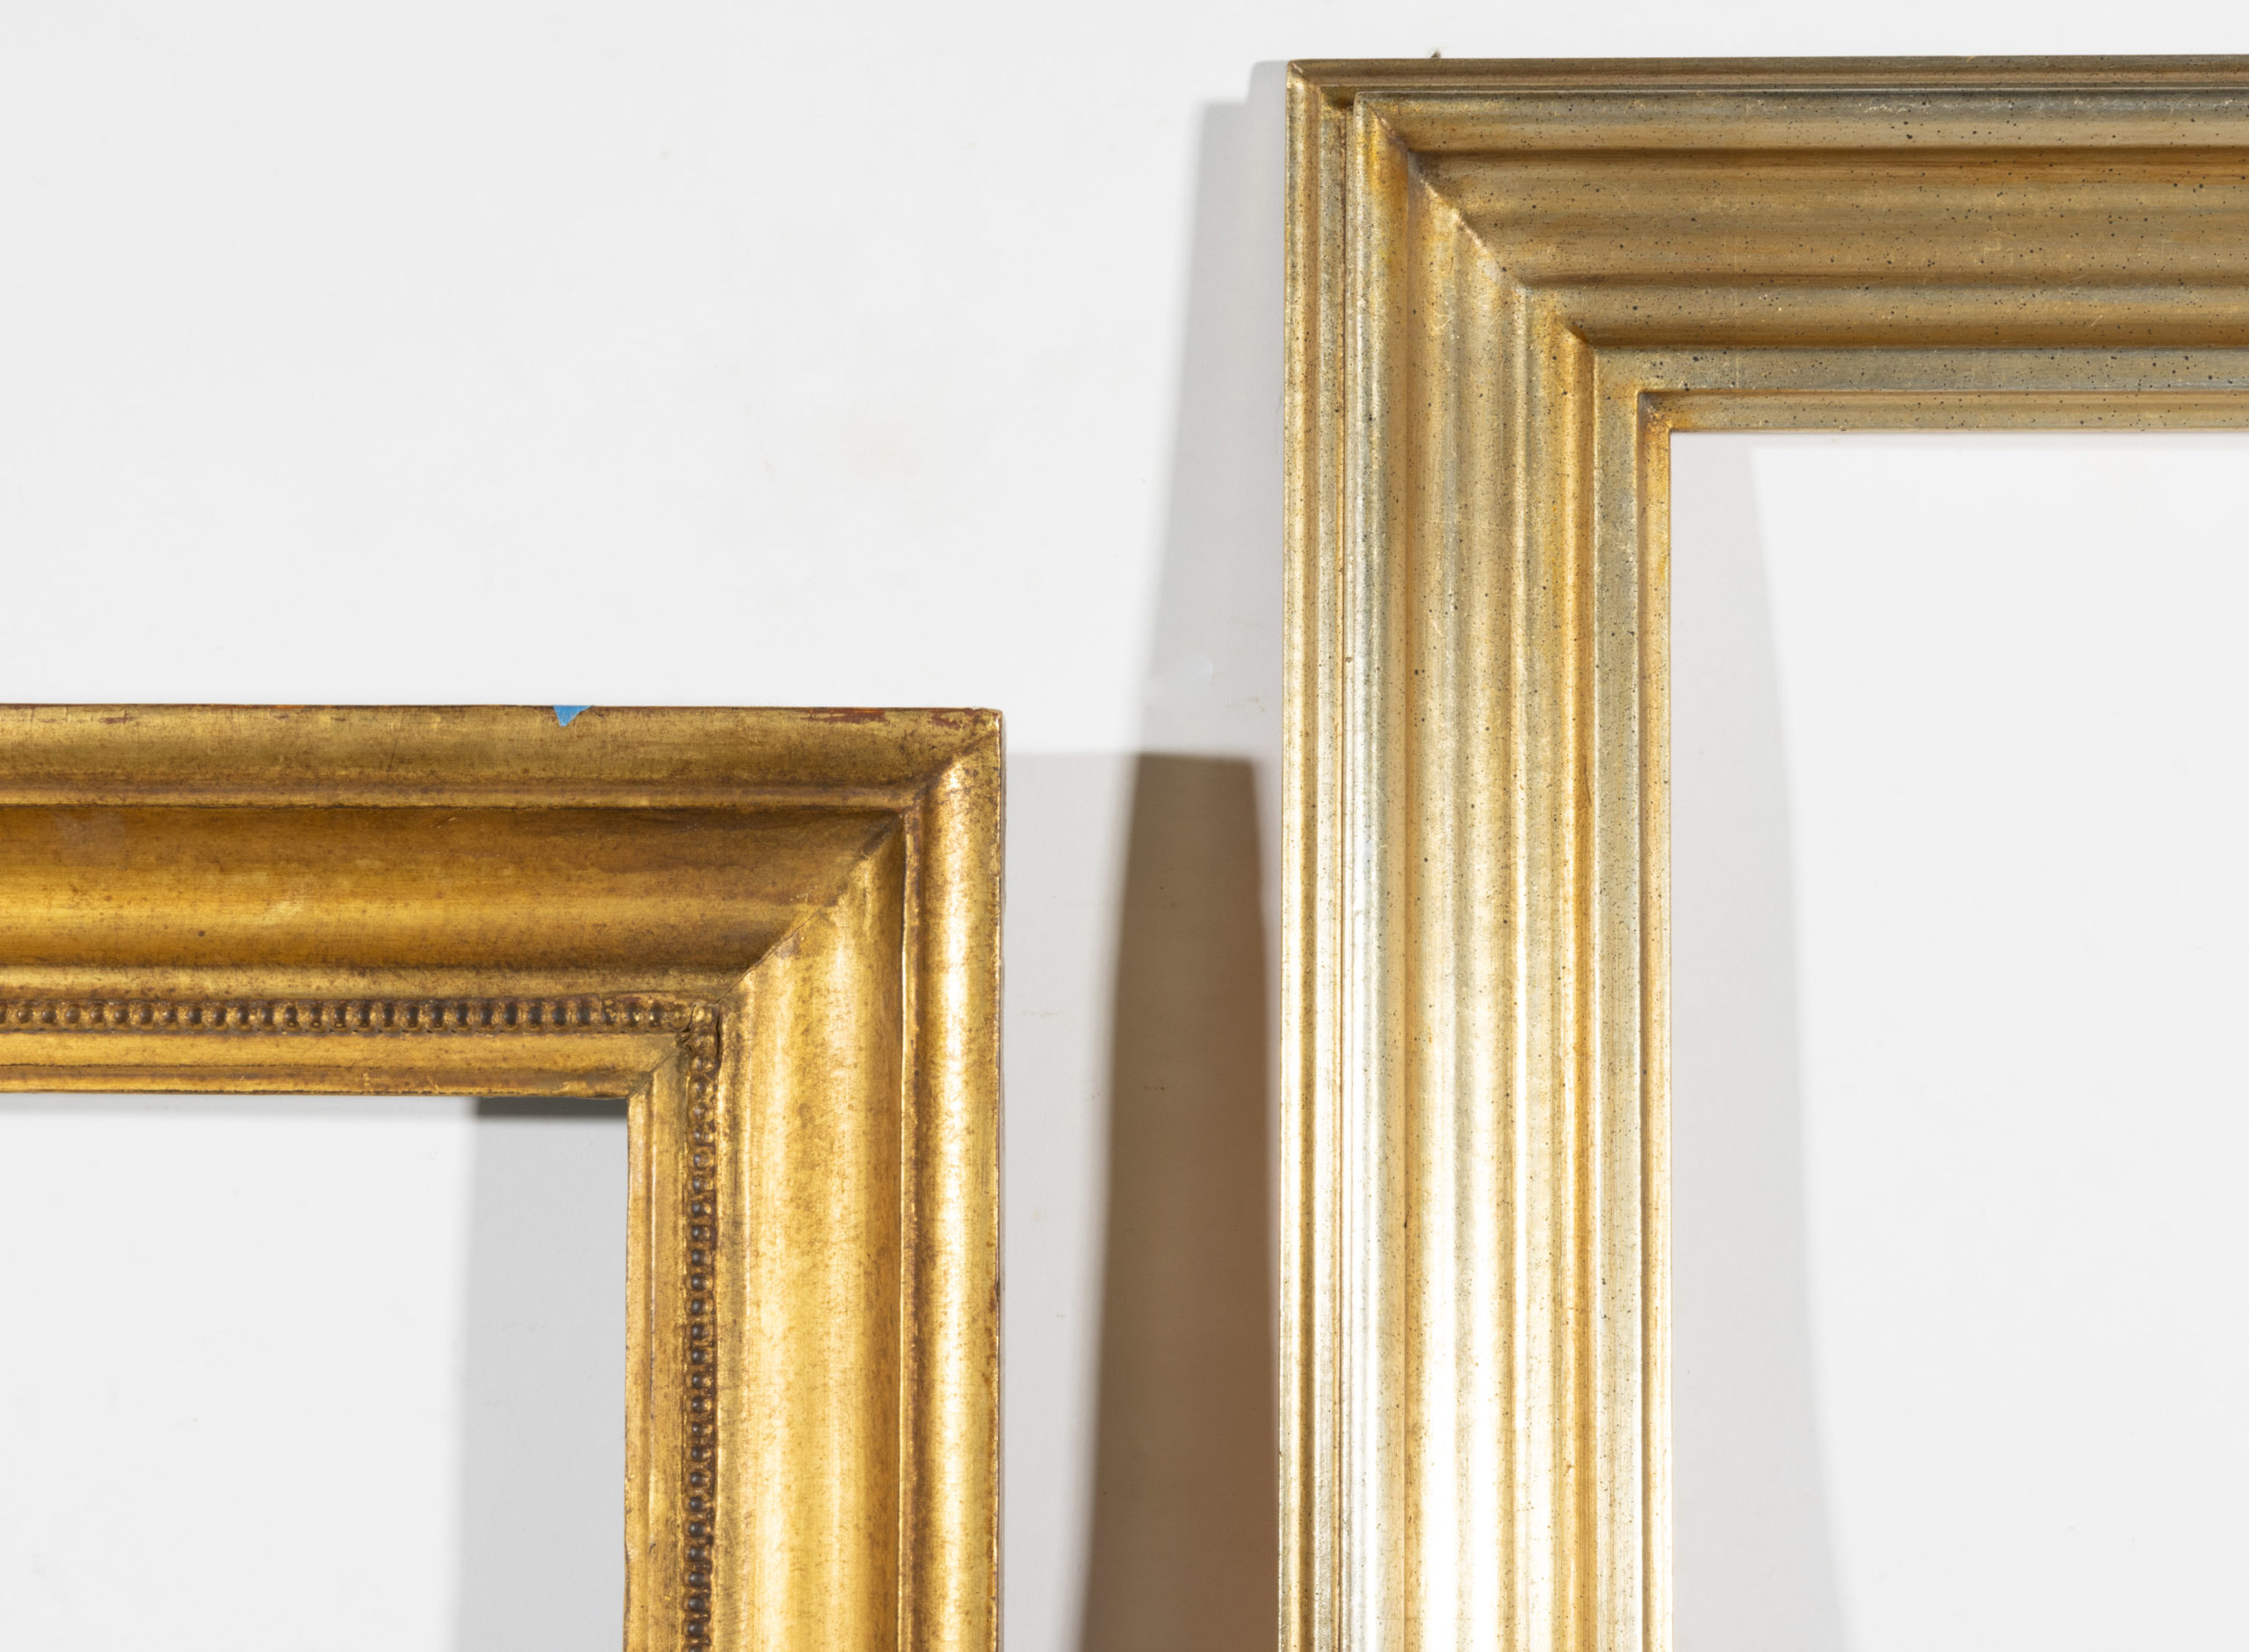 ANTIQUE-STYLE PICTURE FRAMES, LOT OF FIVE,